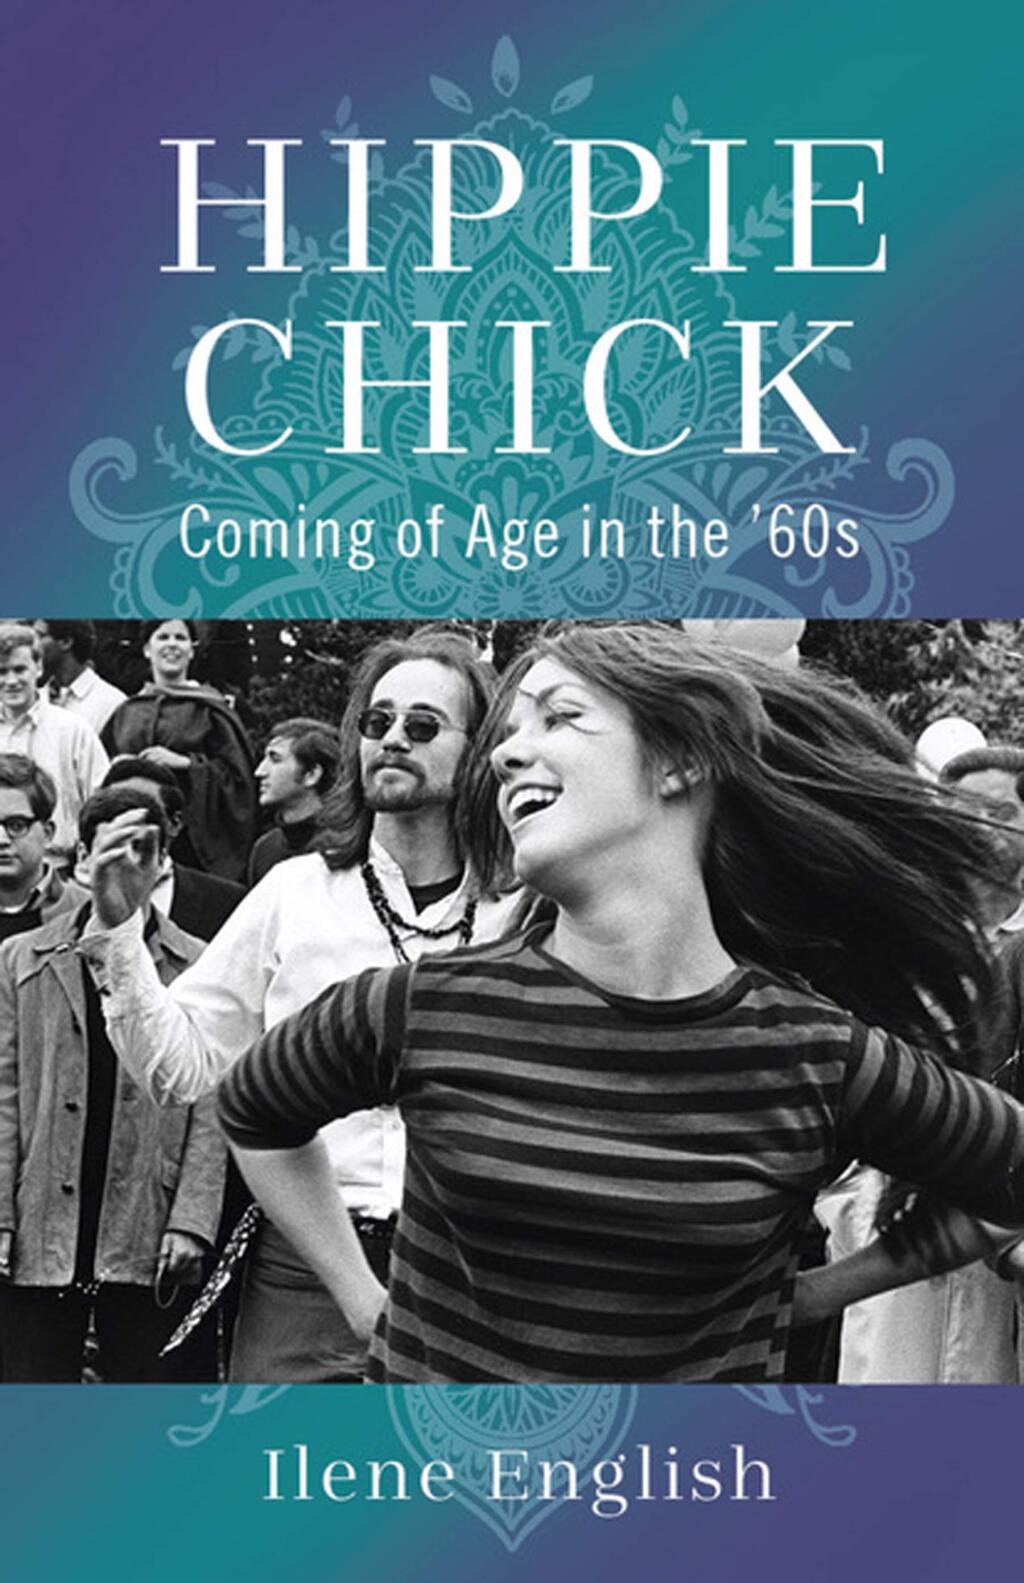 Ilene English recounts her life in the 1960s in her memoir 'Hippie Chick: Coming of Age in the '60s.' It's a 'deeply personal story of how one young woman manages to survive and even to thrive in the face of the whirlwind of experiences coming at her,' according to an Amazon review.